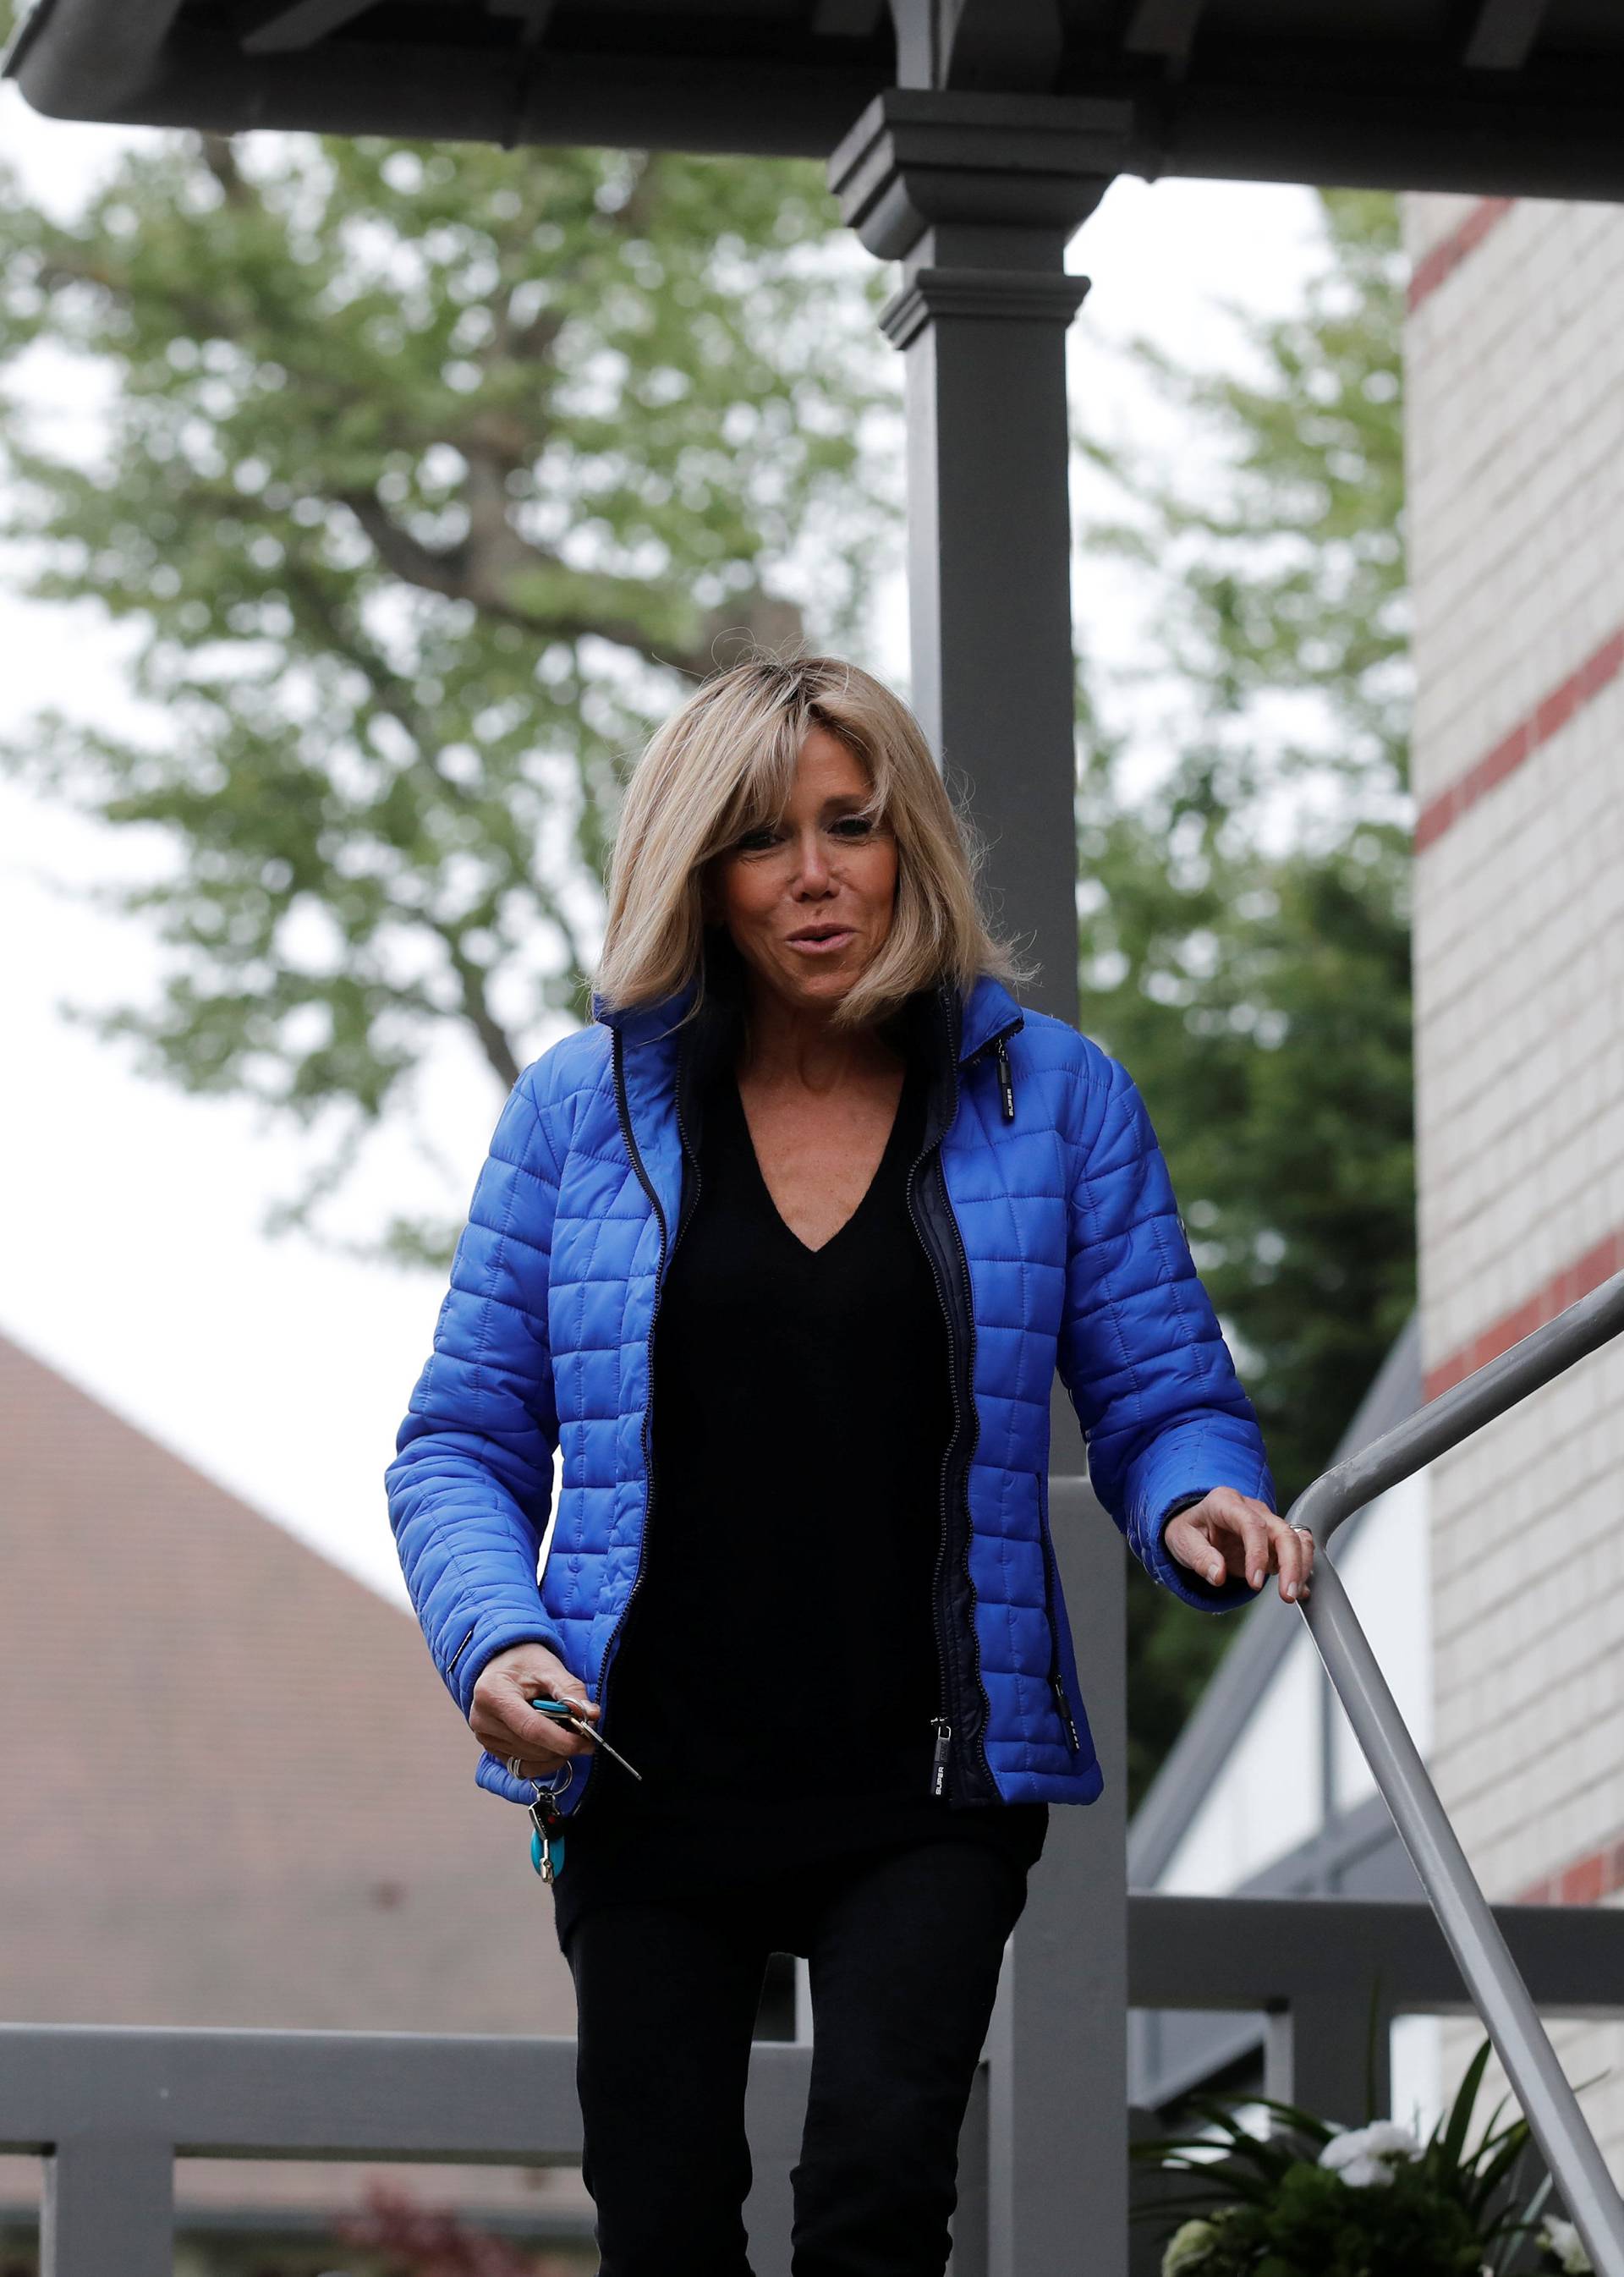 Brigitte Trogneux, wife of French presidential candidate Emmanuel Macron, speaks with media outside her house in Le Touquet, France